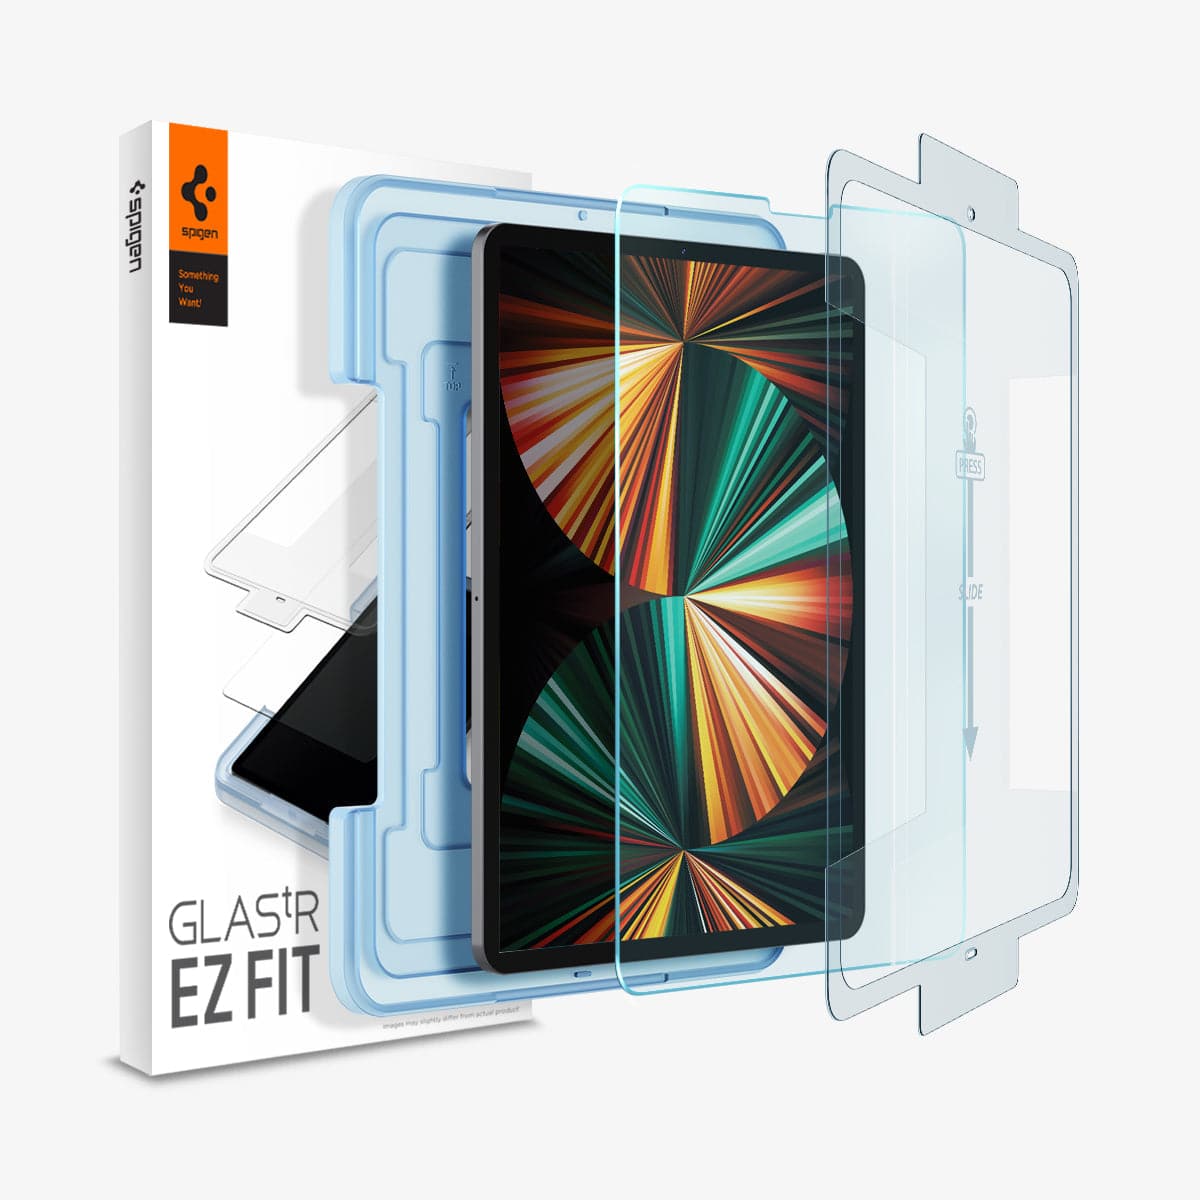 AGL02809 - iPad Pro 12.9" Screen Protector EZ FIT GLAS.tR showing the device, screen protector, ez fit tray and packaging